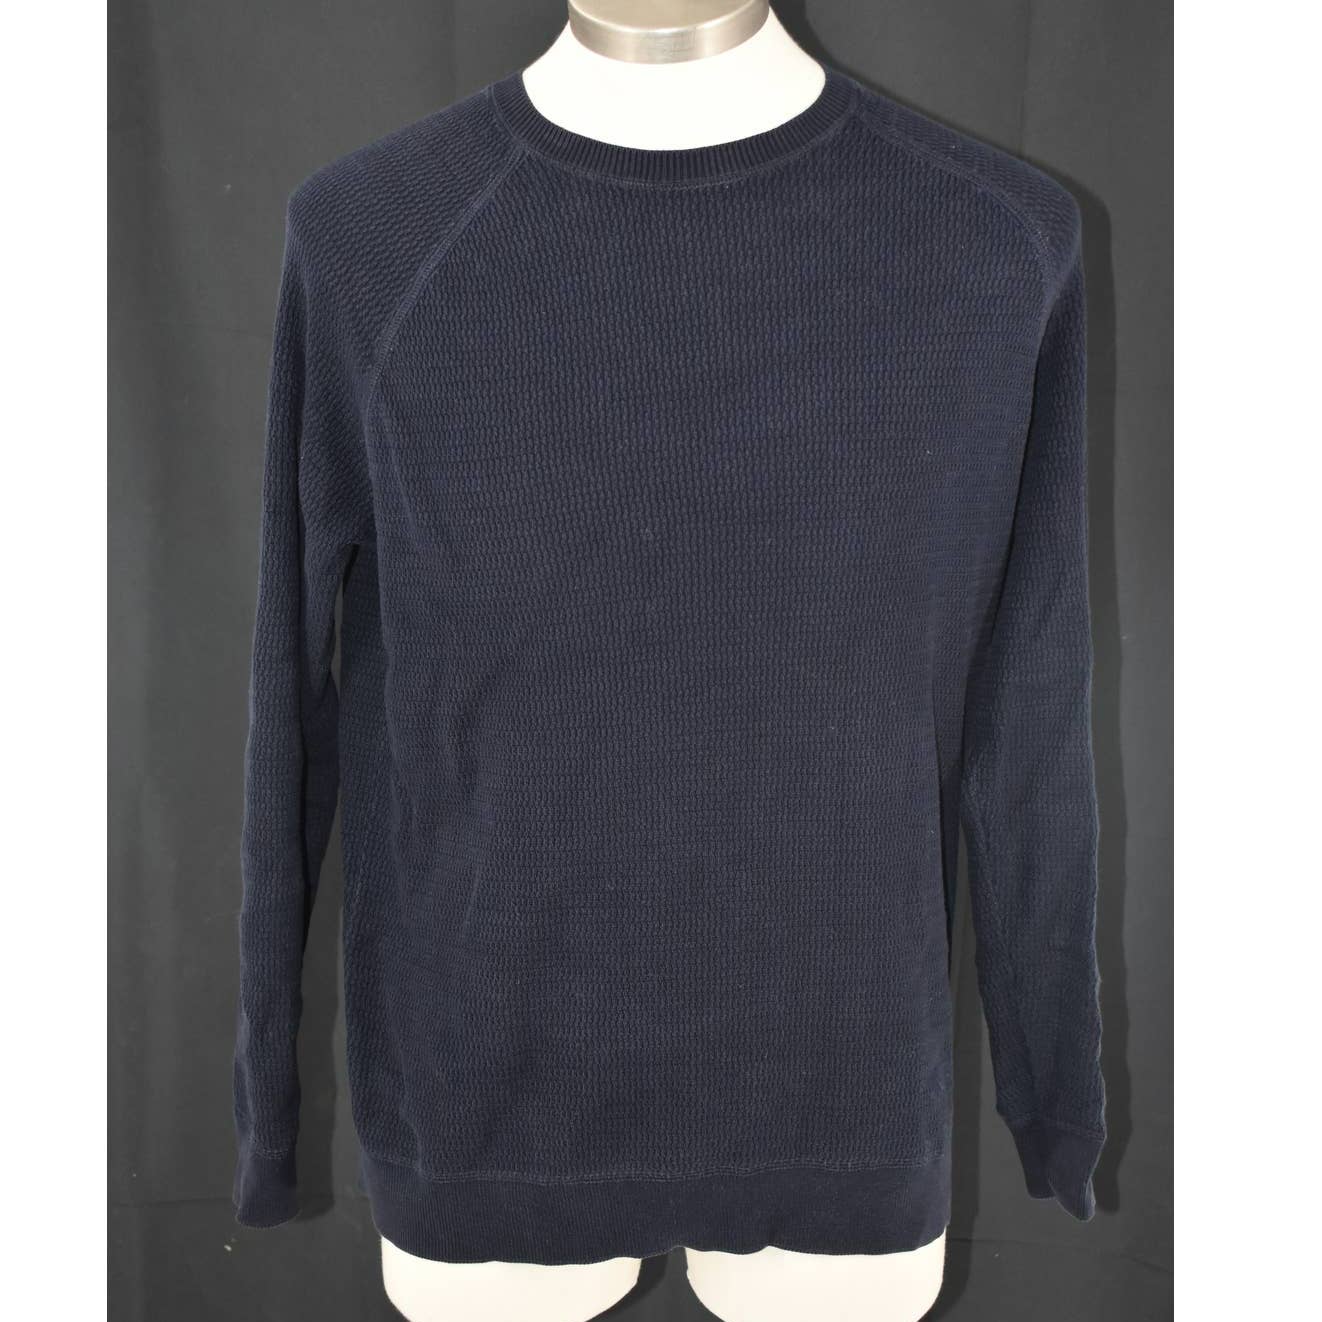 COS Navy Thermal Crew Neck Sweater  - L